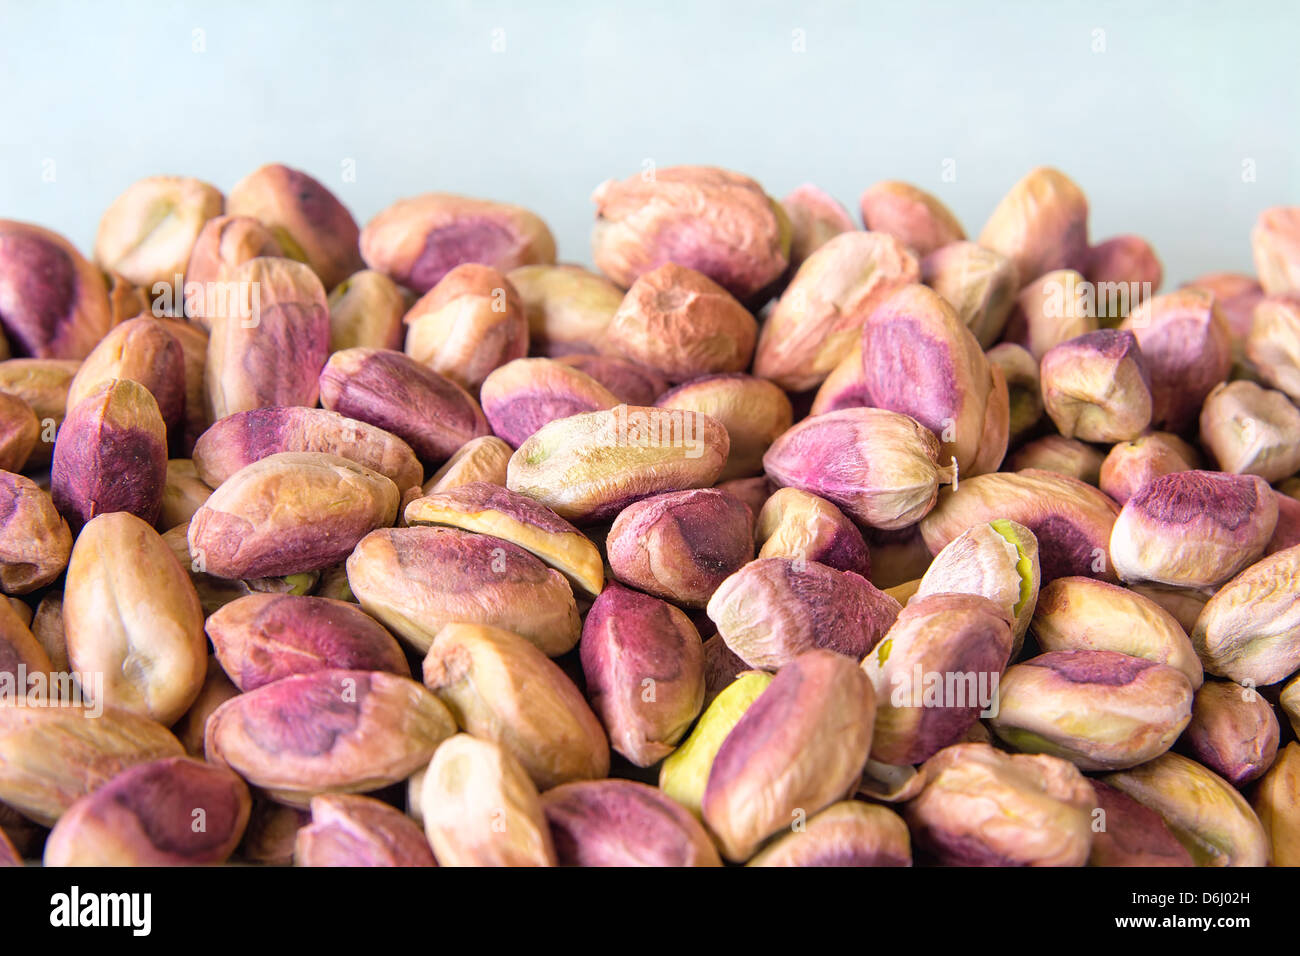 Shelled Pistachio Nuts Closeup Piled Up Stock Photo